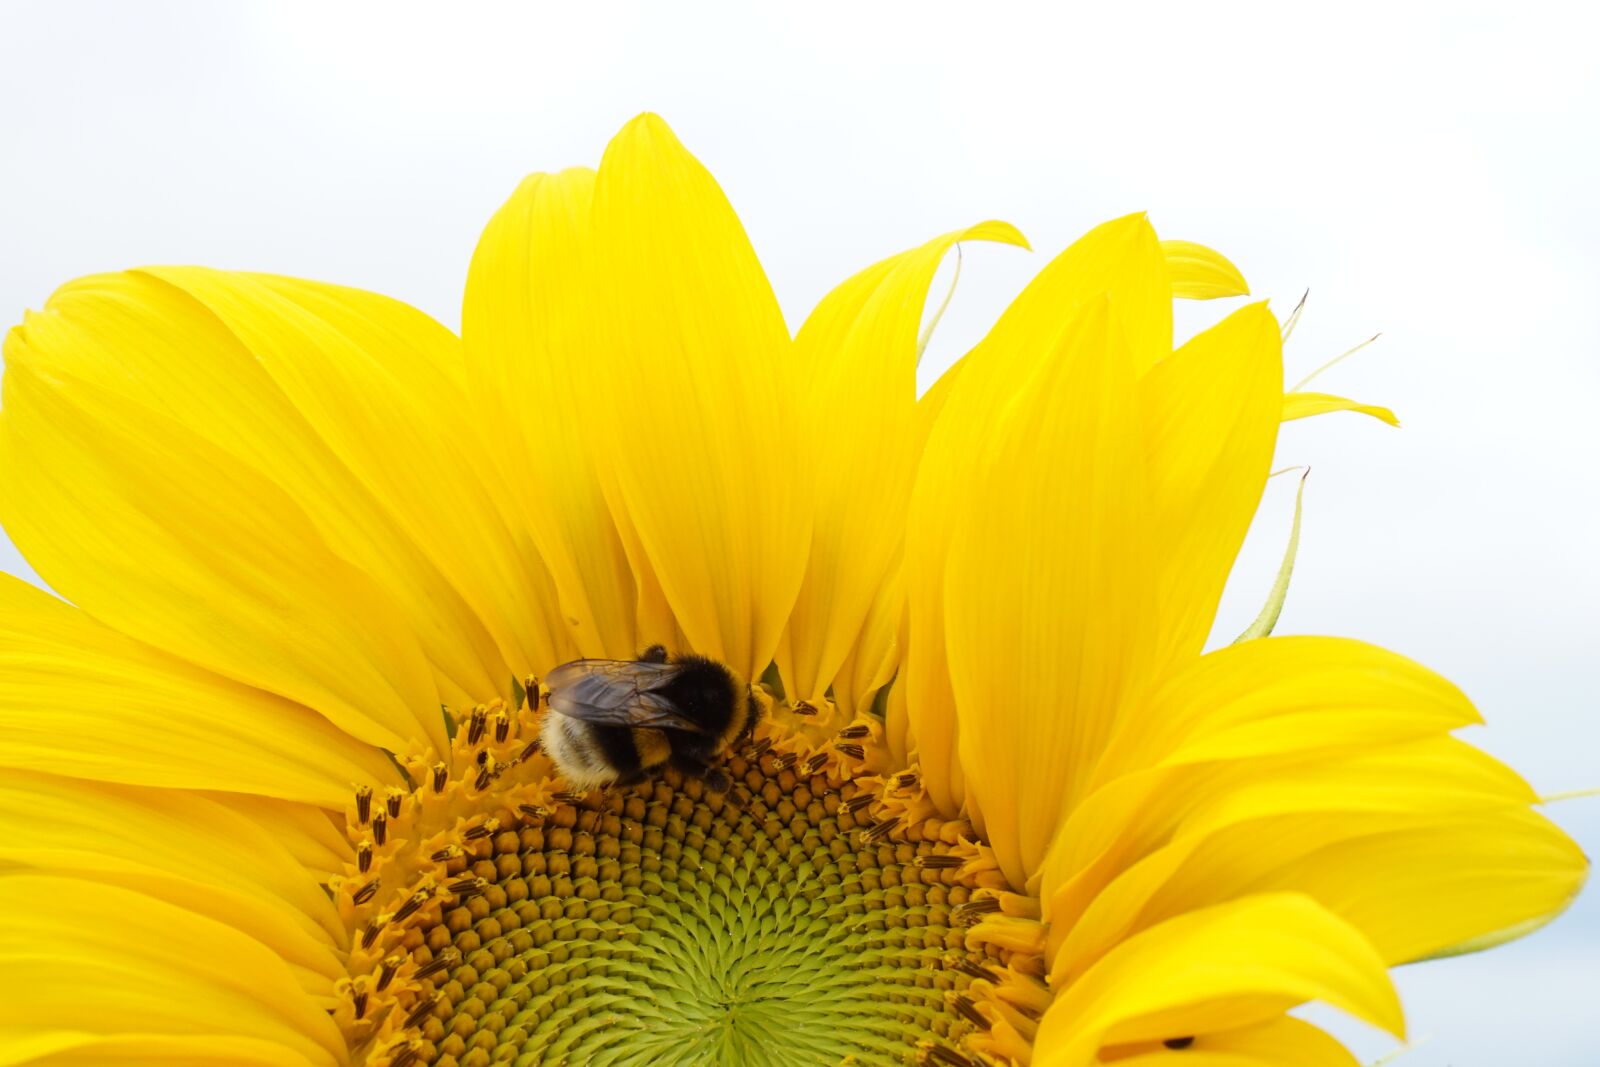 Sony a5100 sample photo. Sunflower, yellow, summer photography